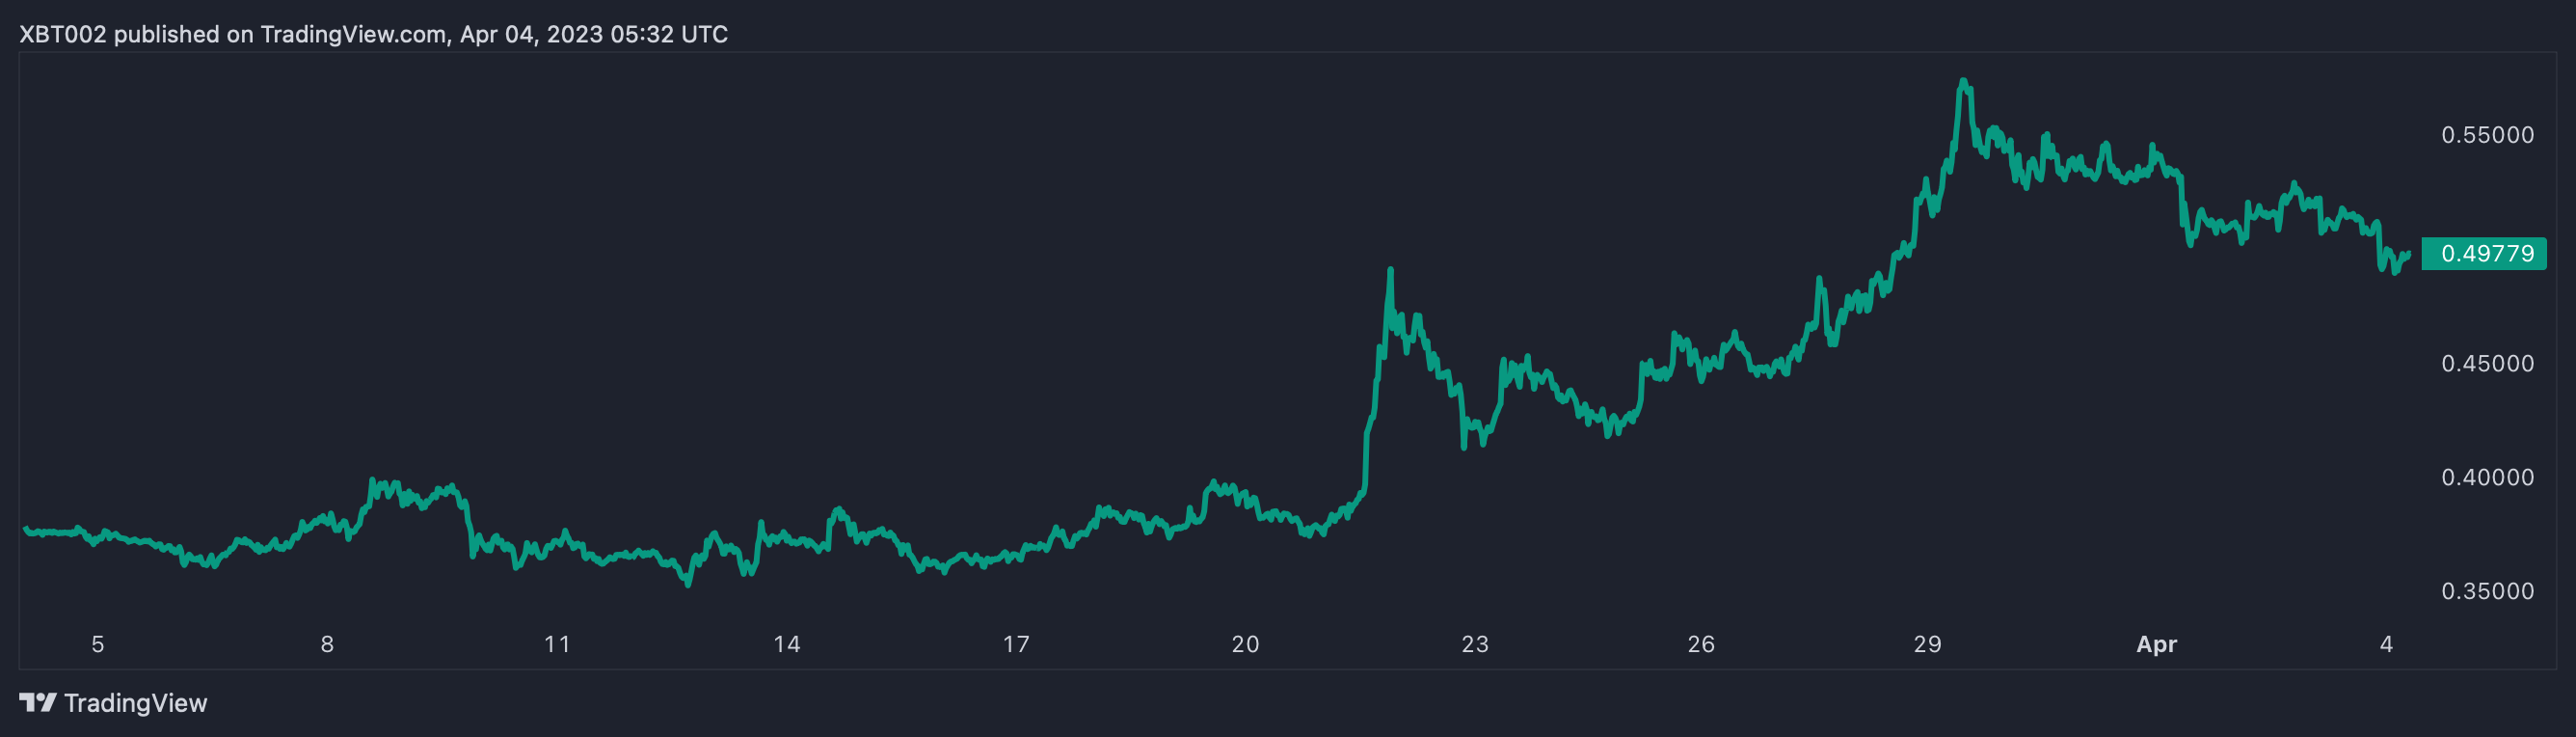 TradingView chart showing a price increase for XRP over the last 30 days